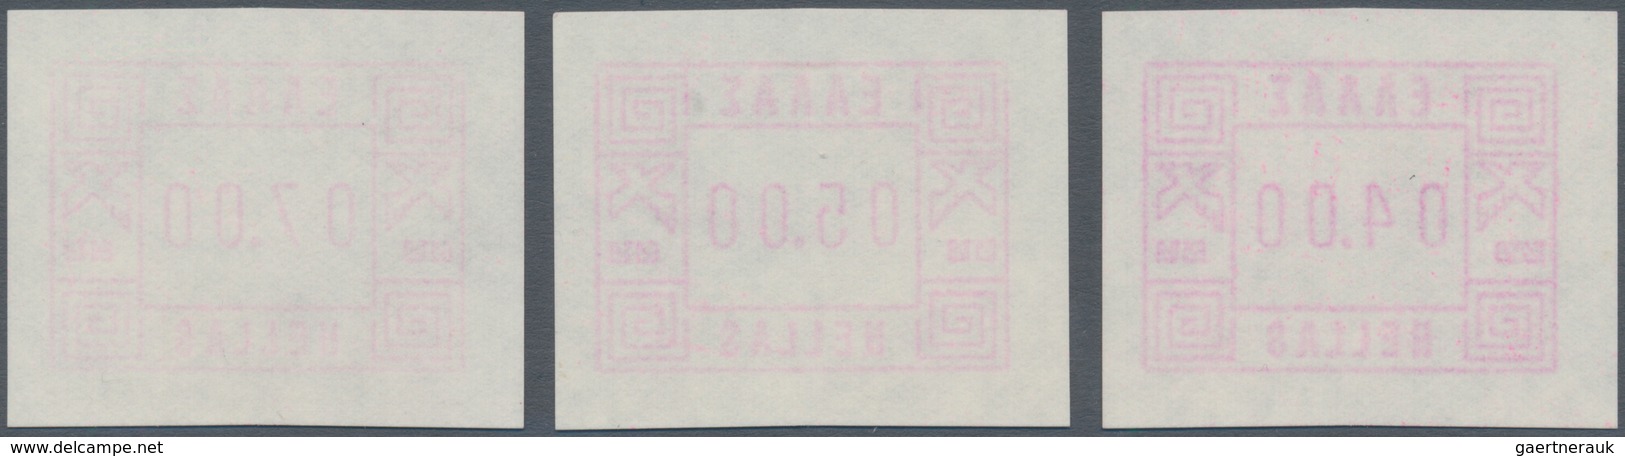 01500 Griechenland: 1979, (ATM Piloting Issue). One Of The Very First ATM Issues In The World That Has Bee - Lettres & Documents